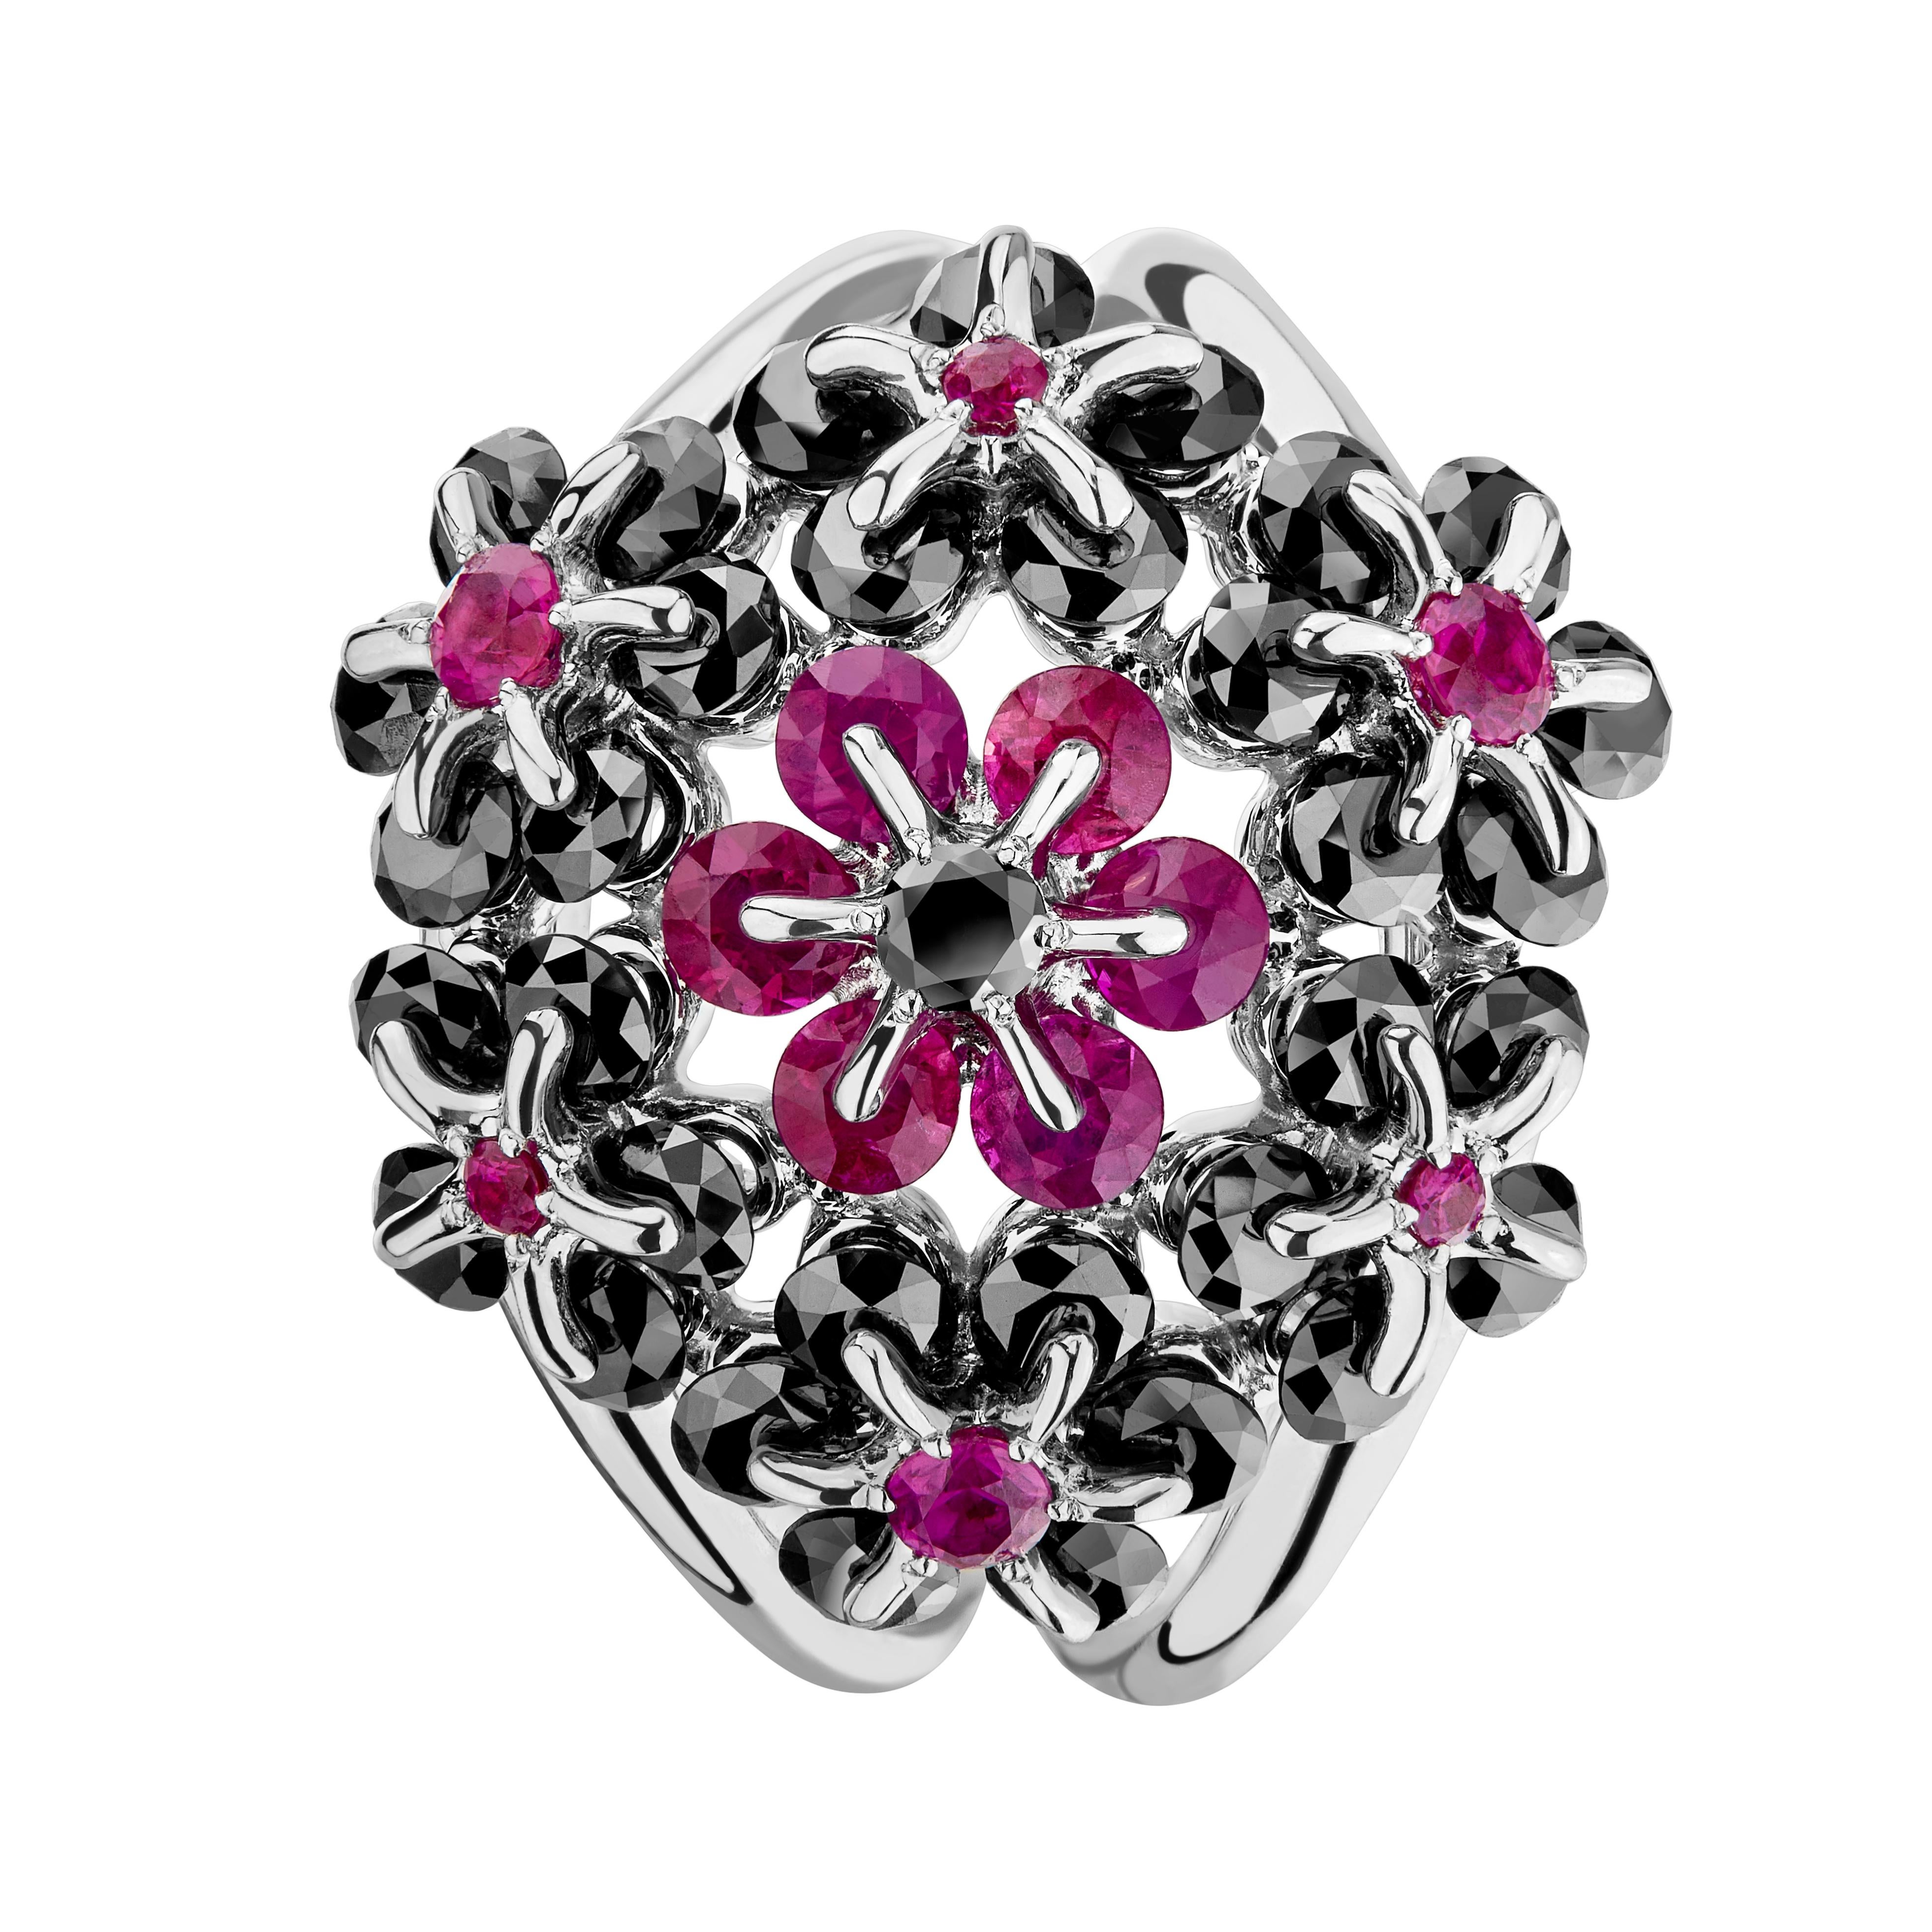 Diamond-cut rubies, white and black diamonds are mounted carefully in delicate flower design, employing innovative technology. Inspired by a graceful ballerina, every gem sparkles and dances  on your finger. Black and red gems are always  attractive